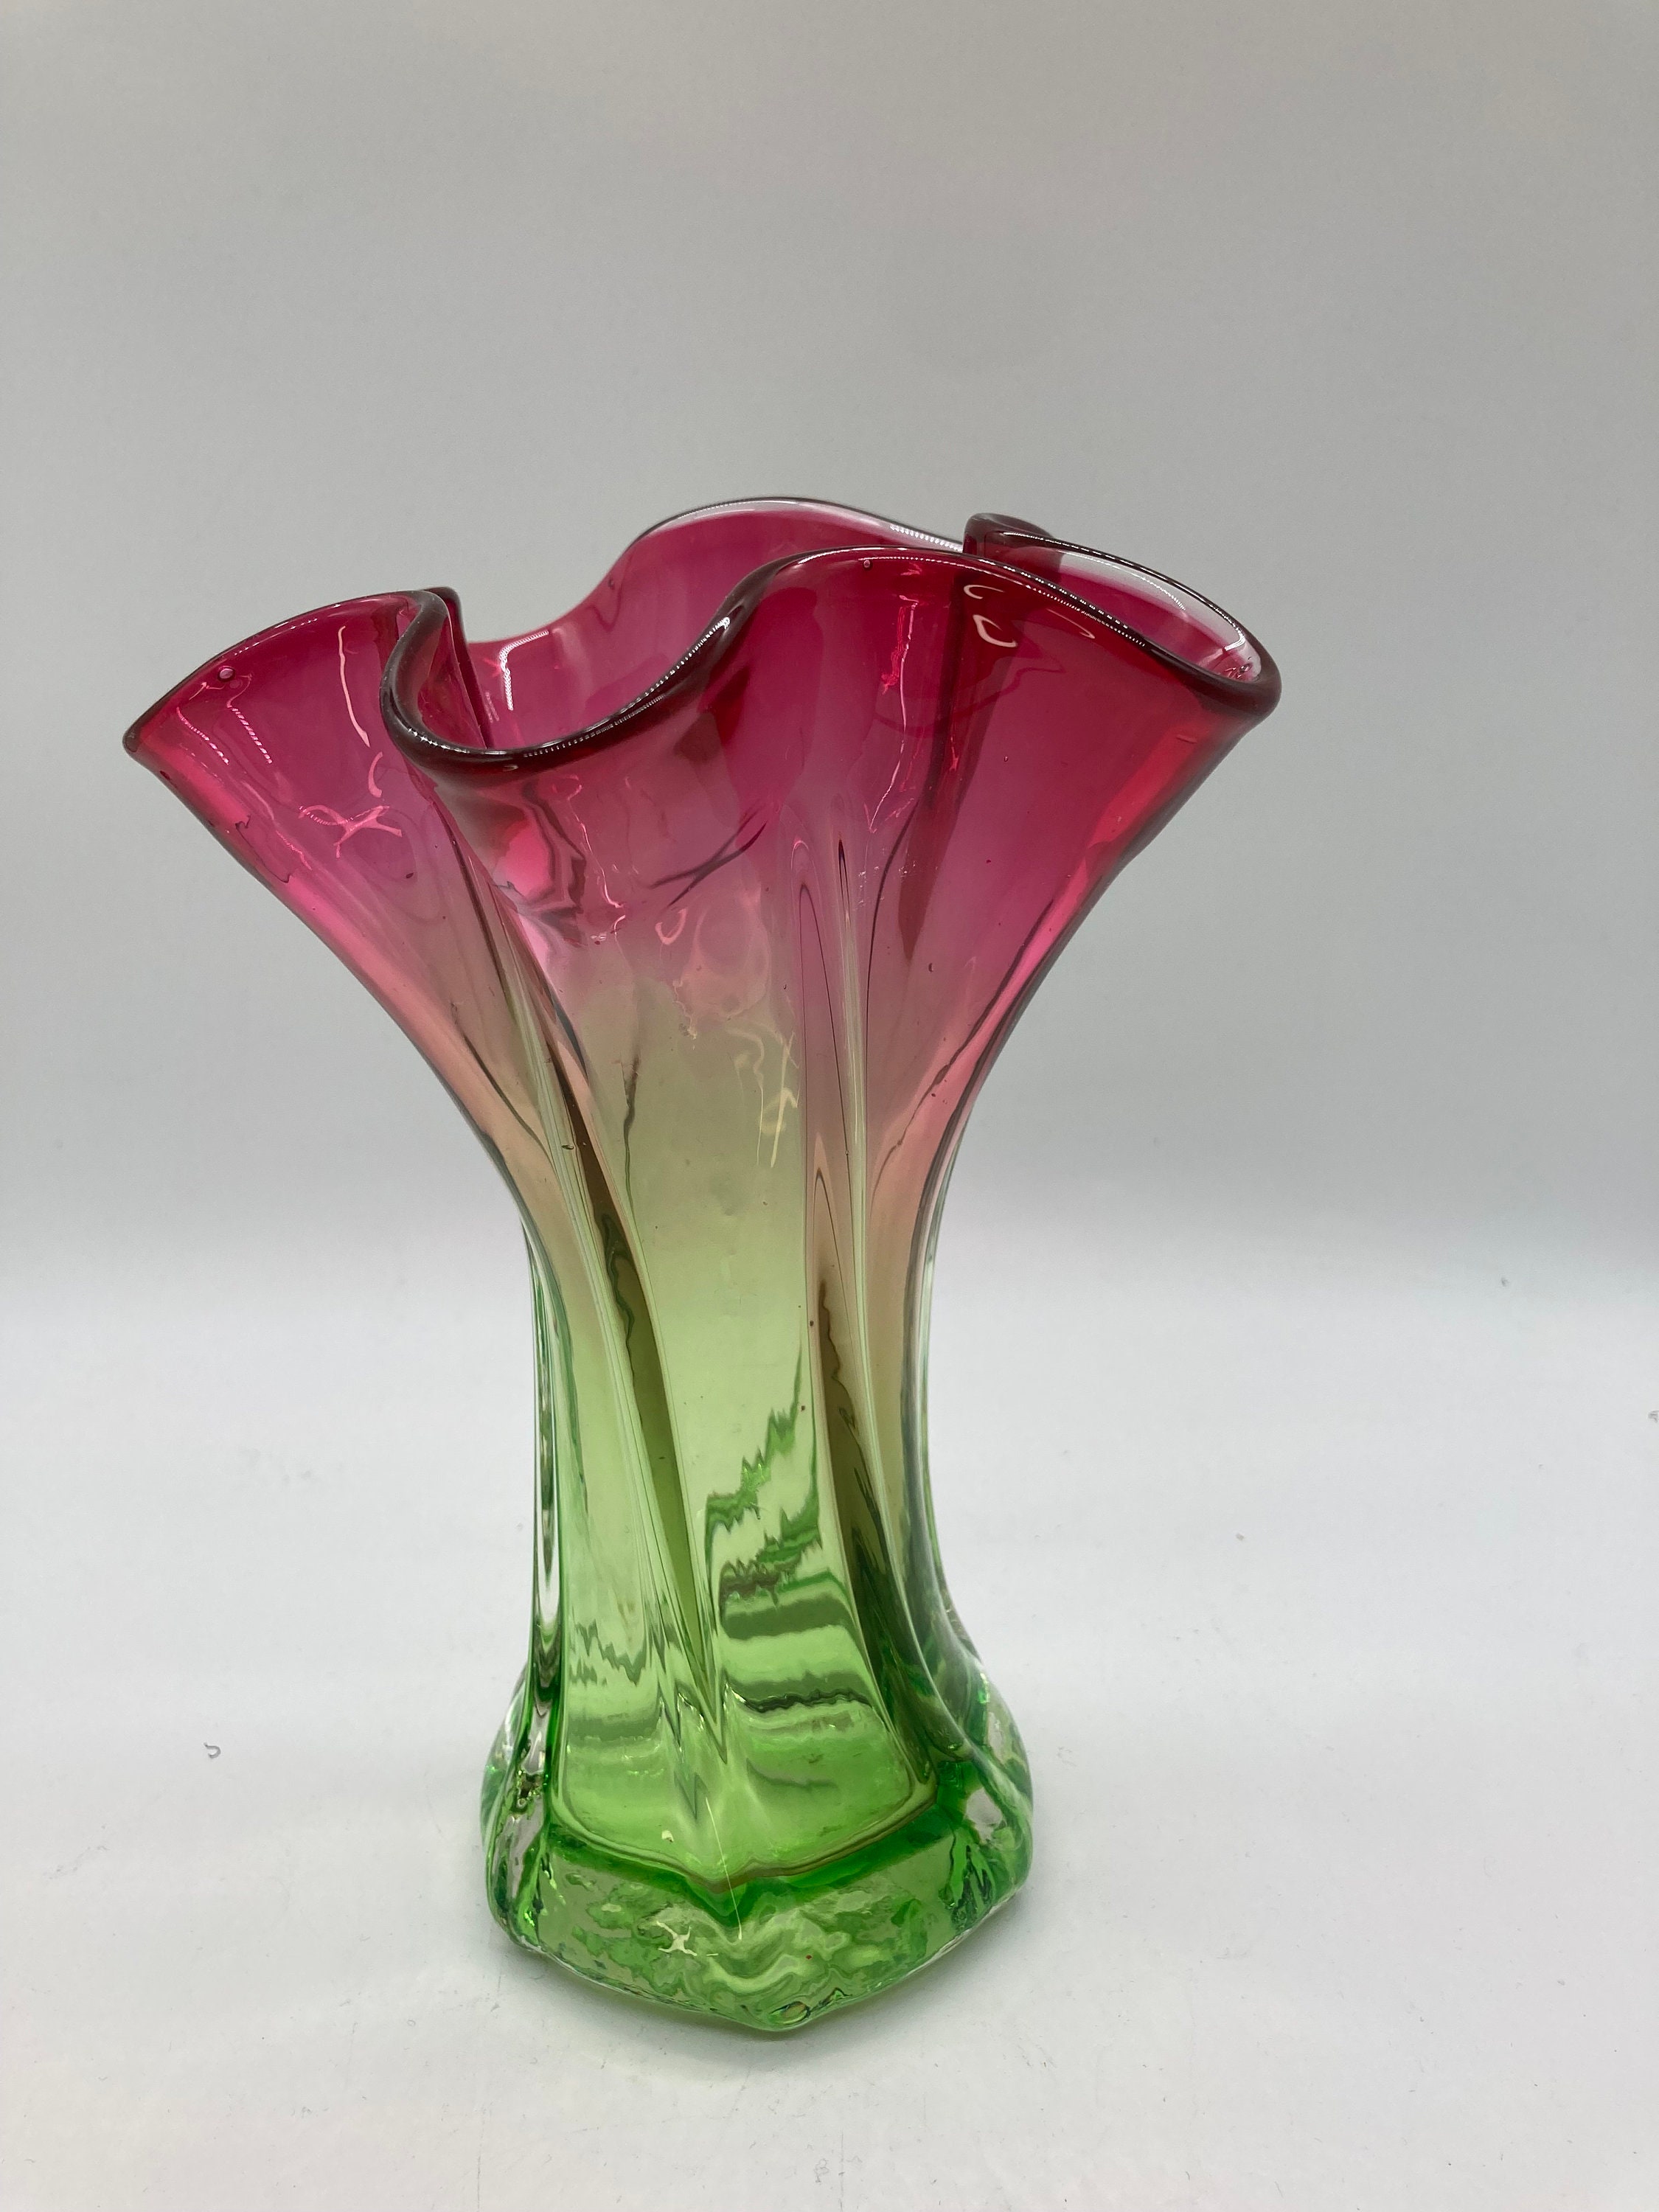 Watermelon Vase Hand Made Mouth Blown Art Glass Vintage Pink - Etsy